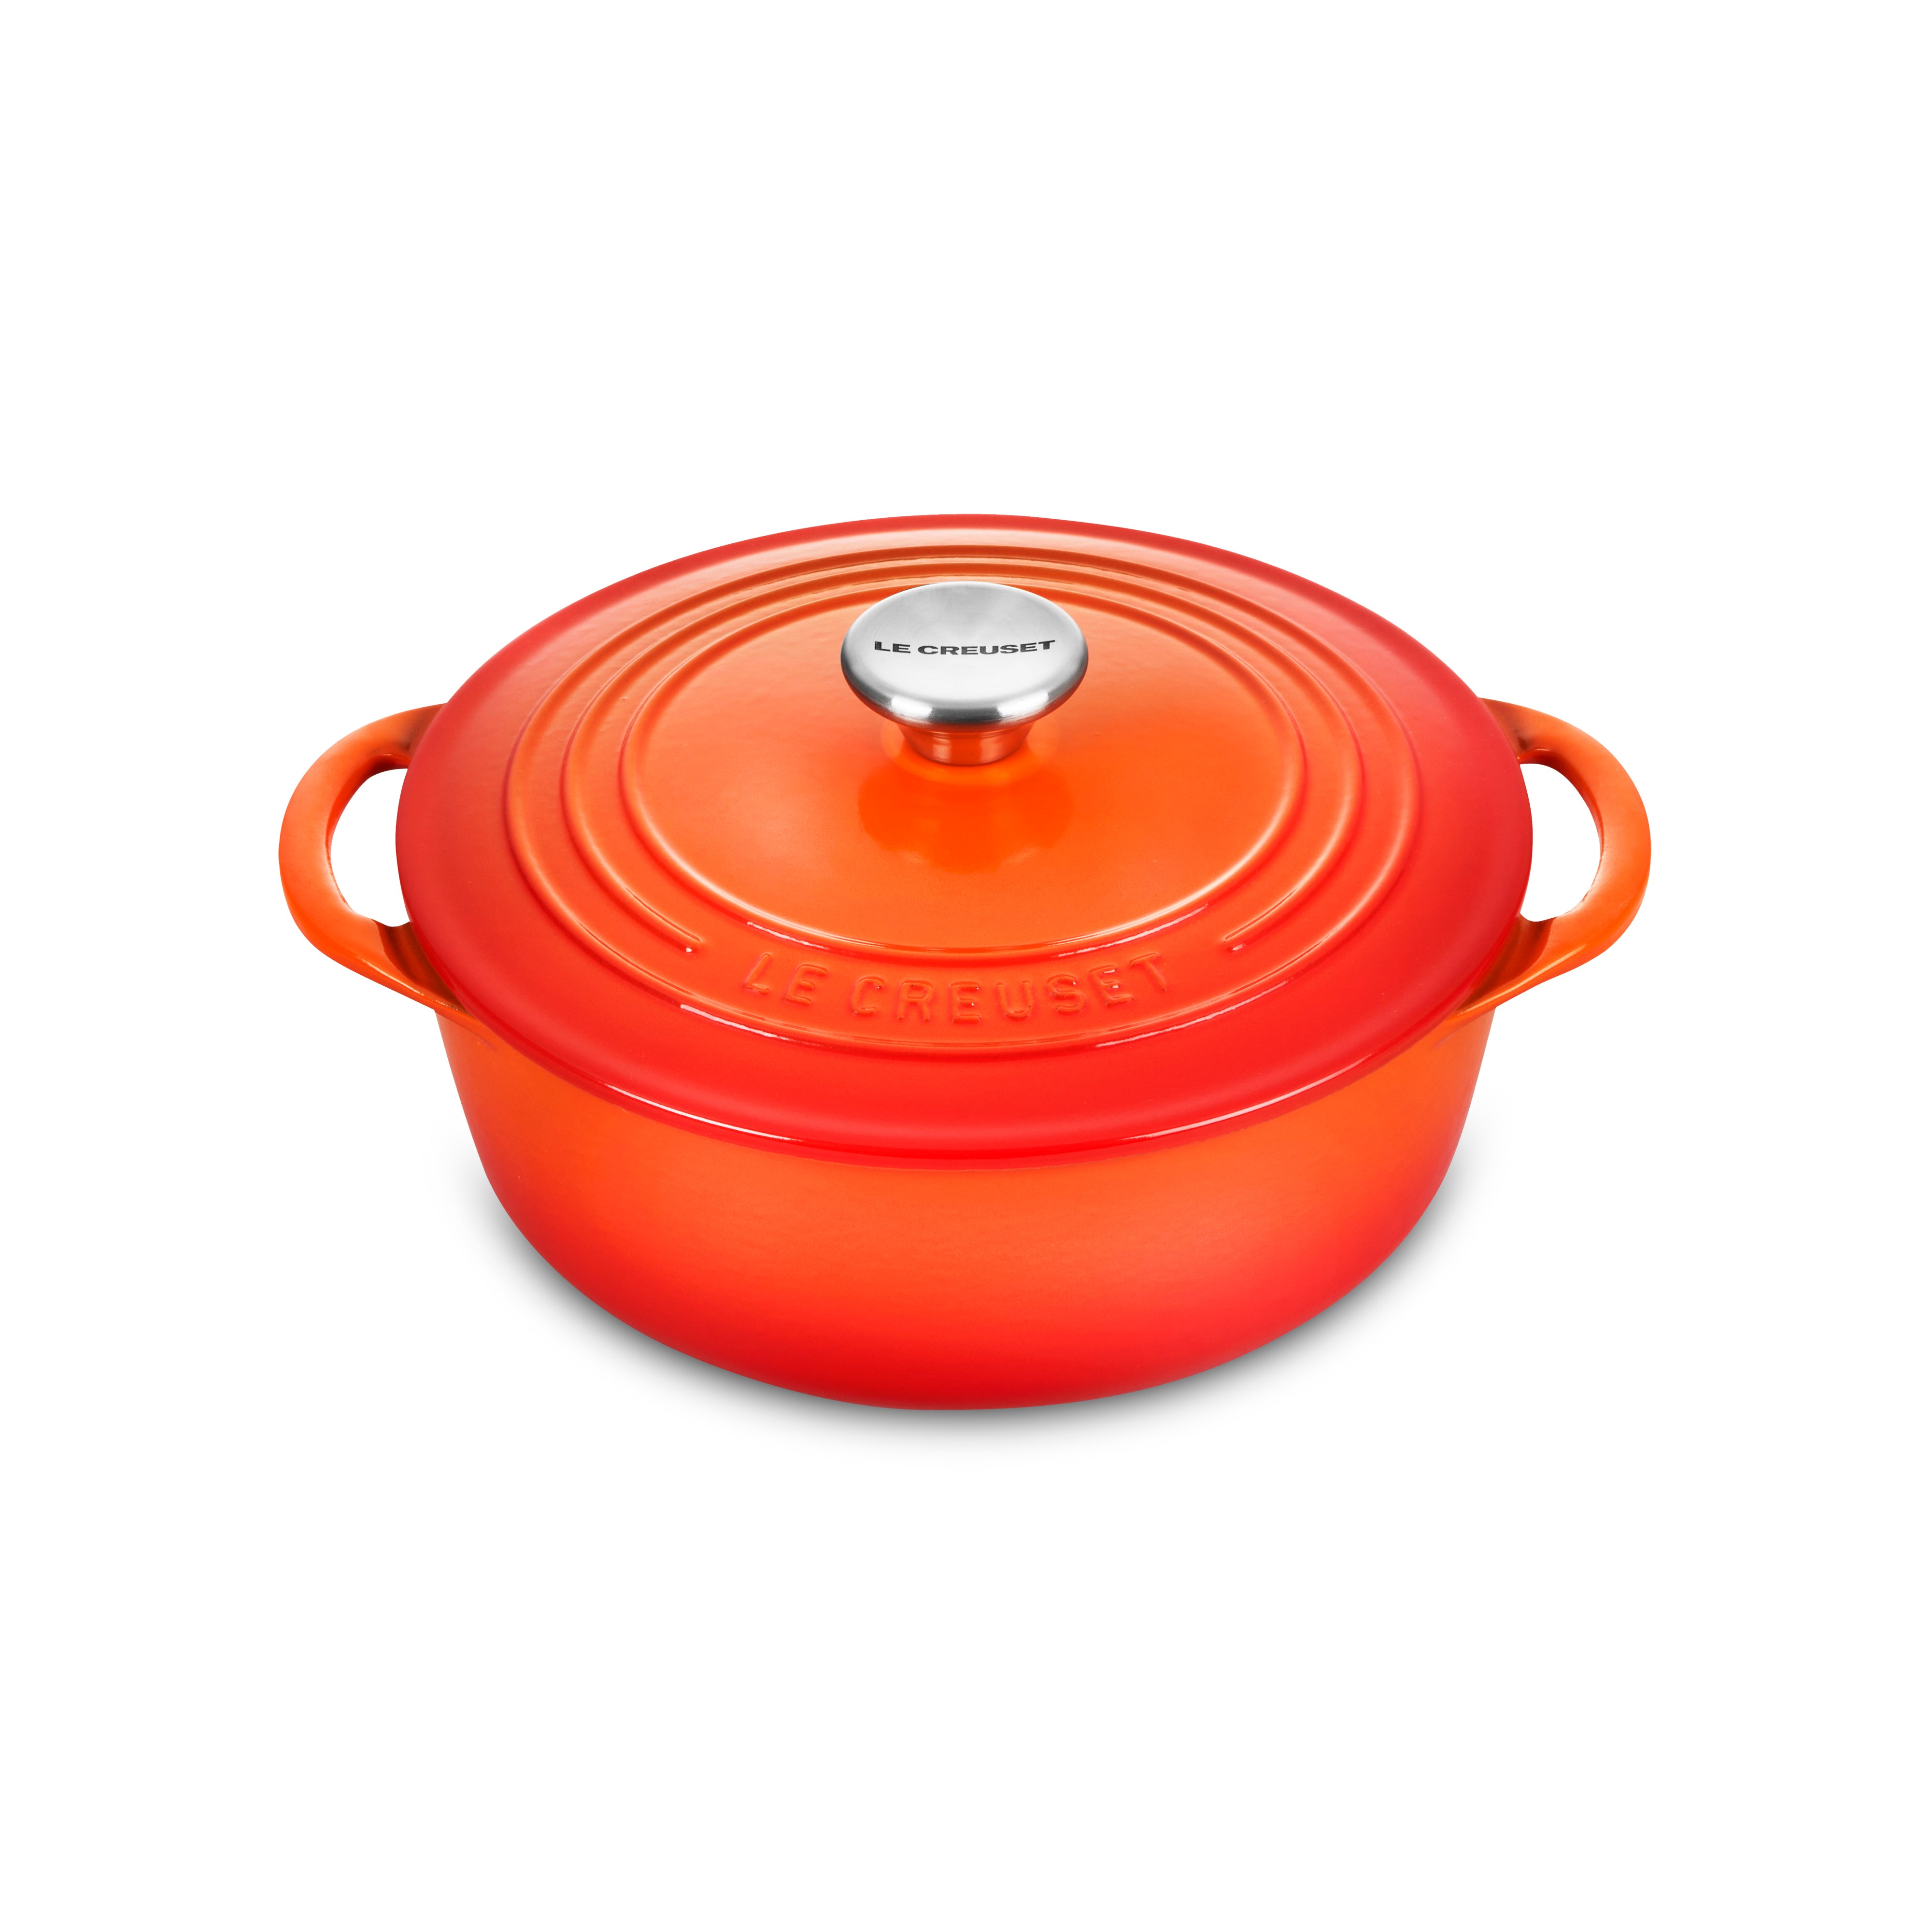 Heiss Induction Small Round Dutch Oven, 2-1/2 Qt, 7-7/8D x 3-1/2